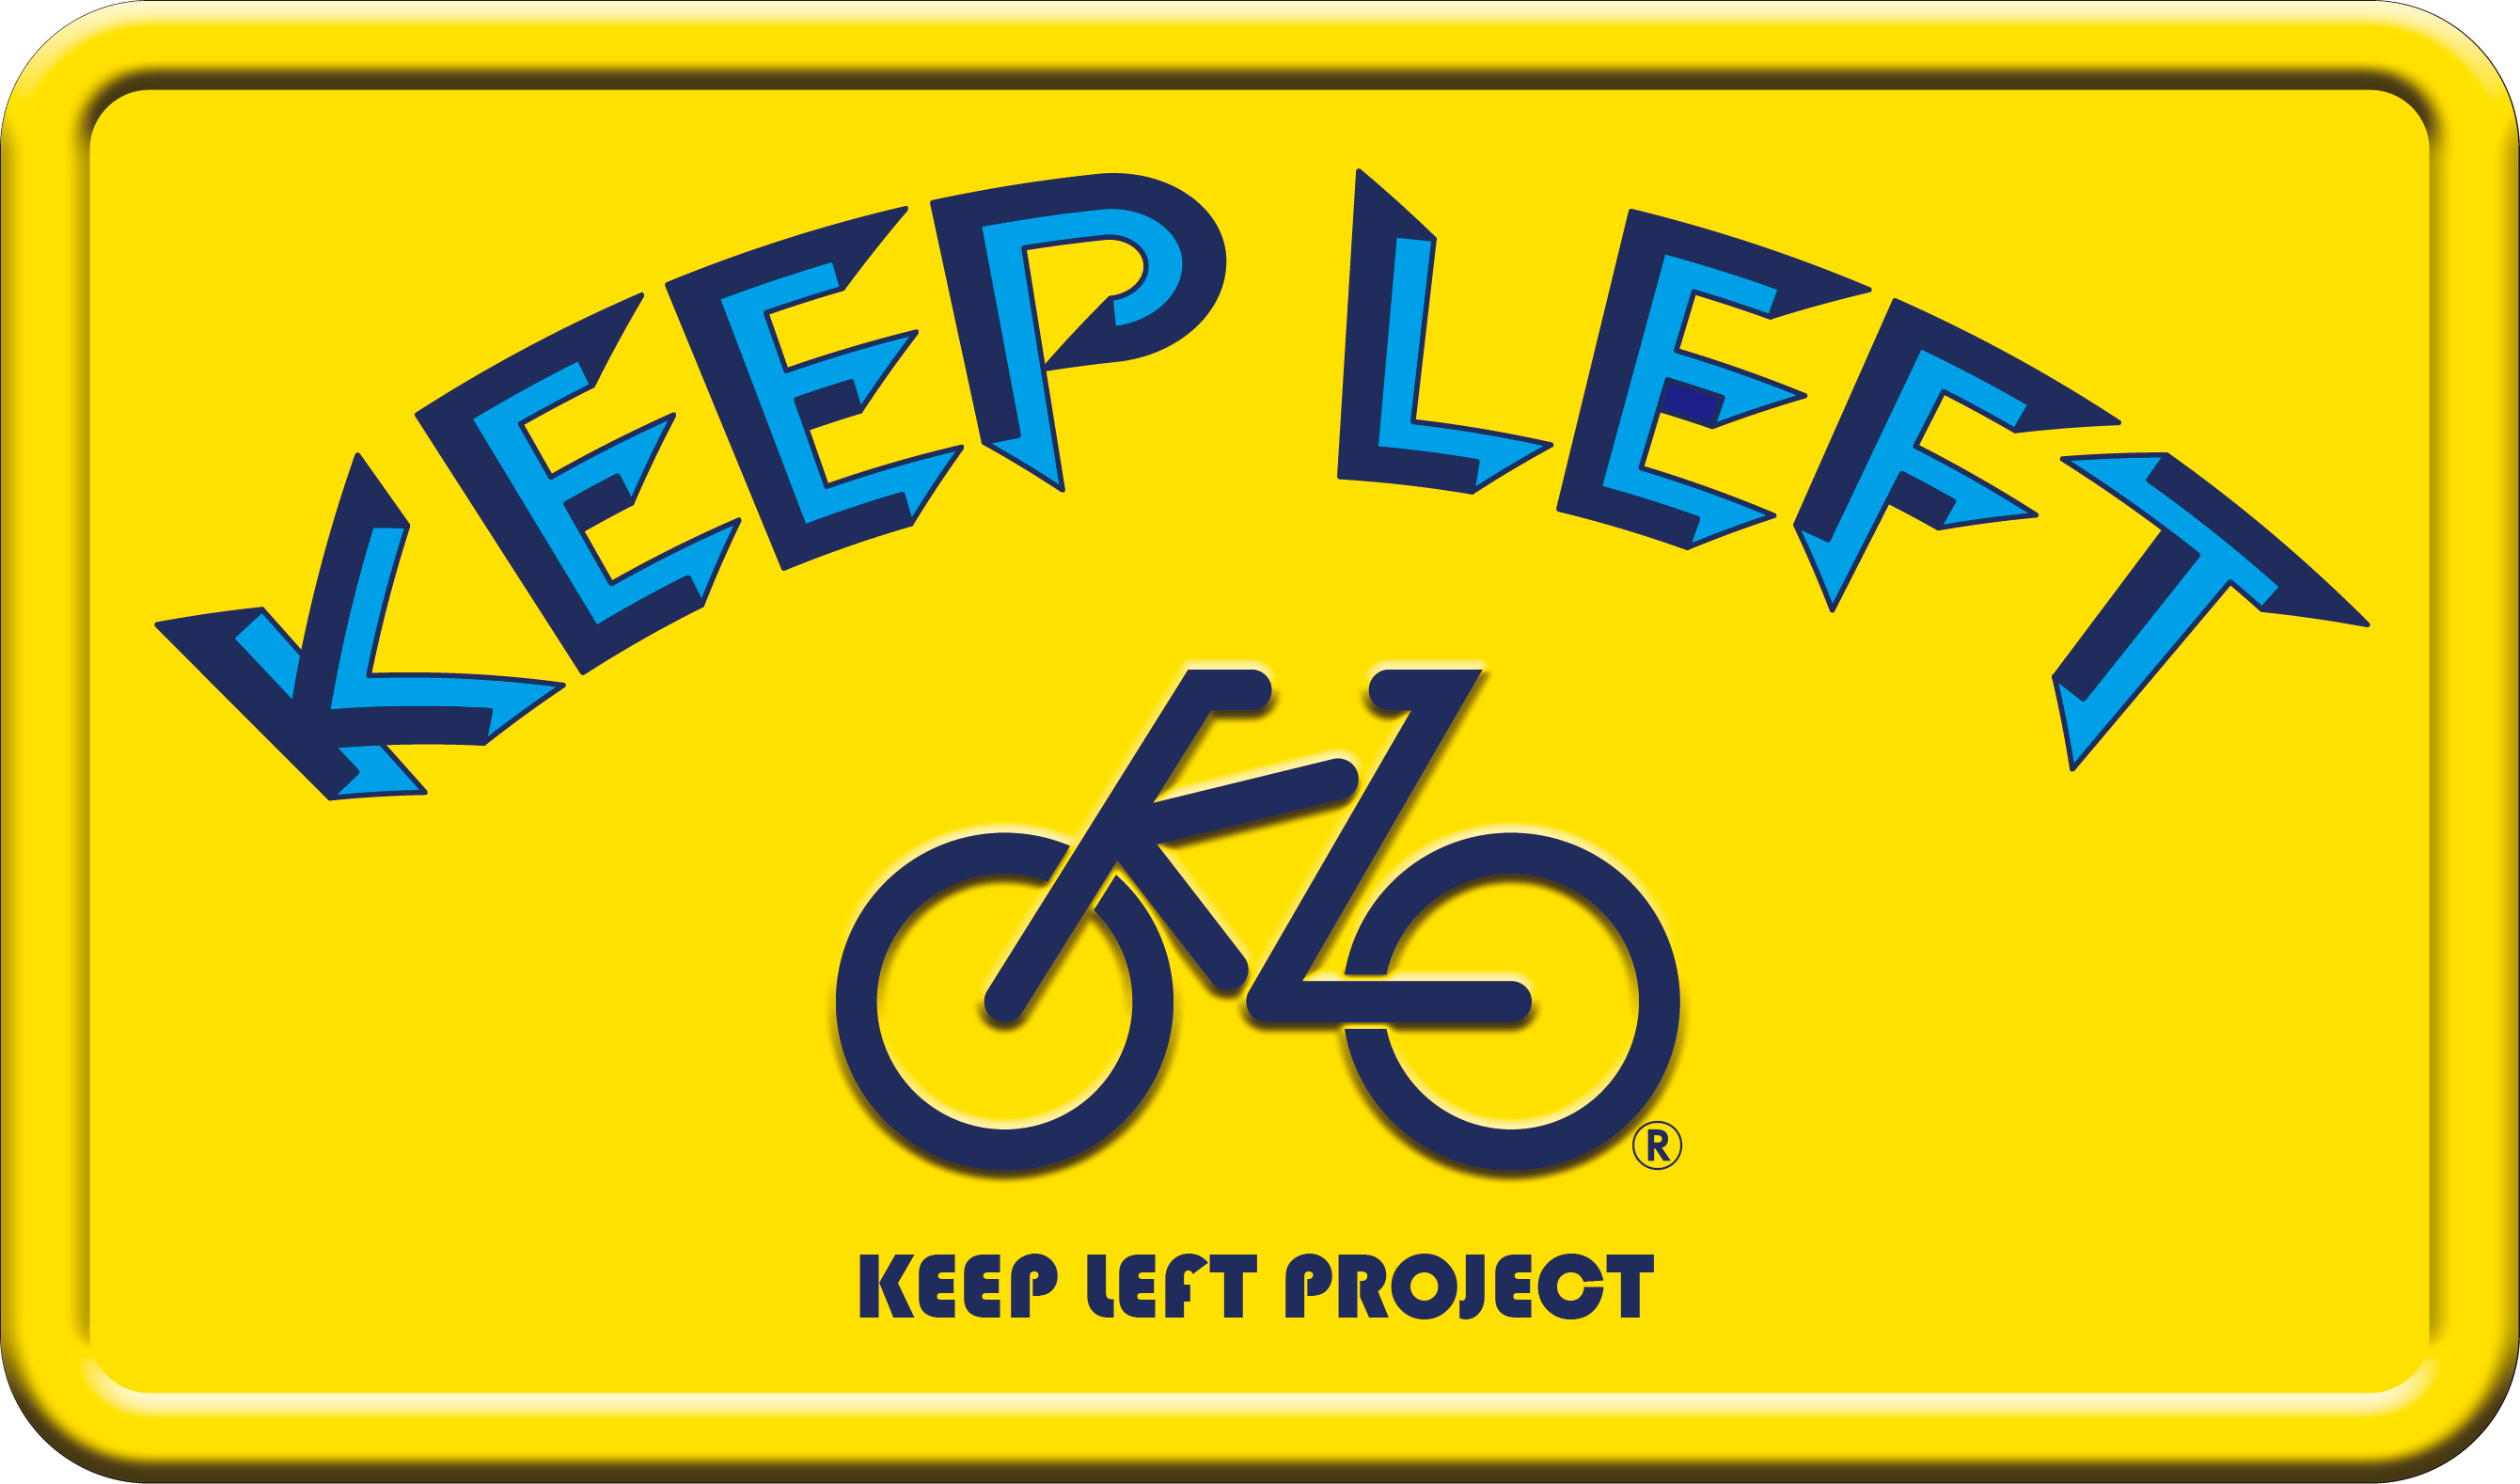 KEEP LEFT PROJECT